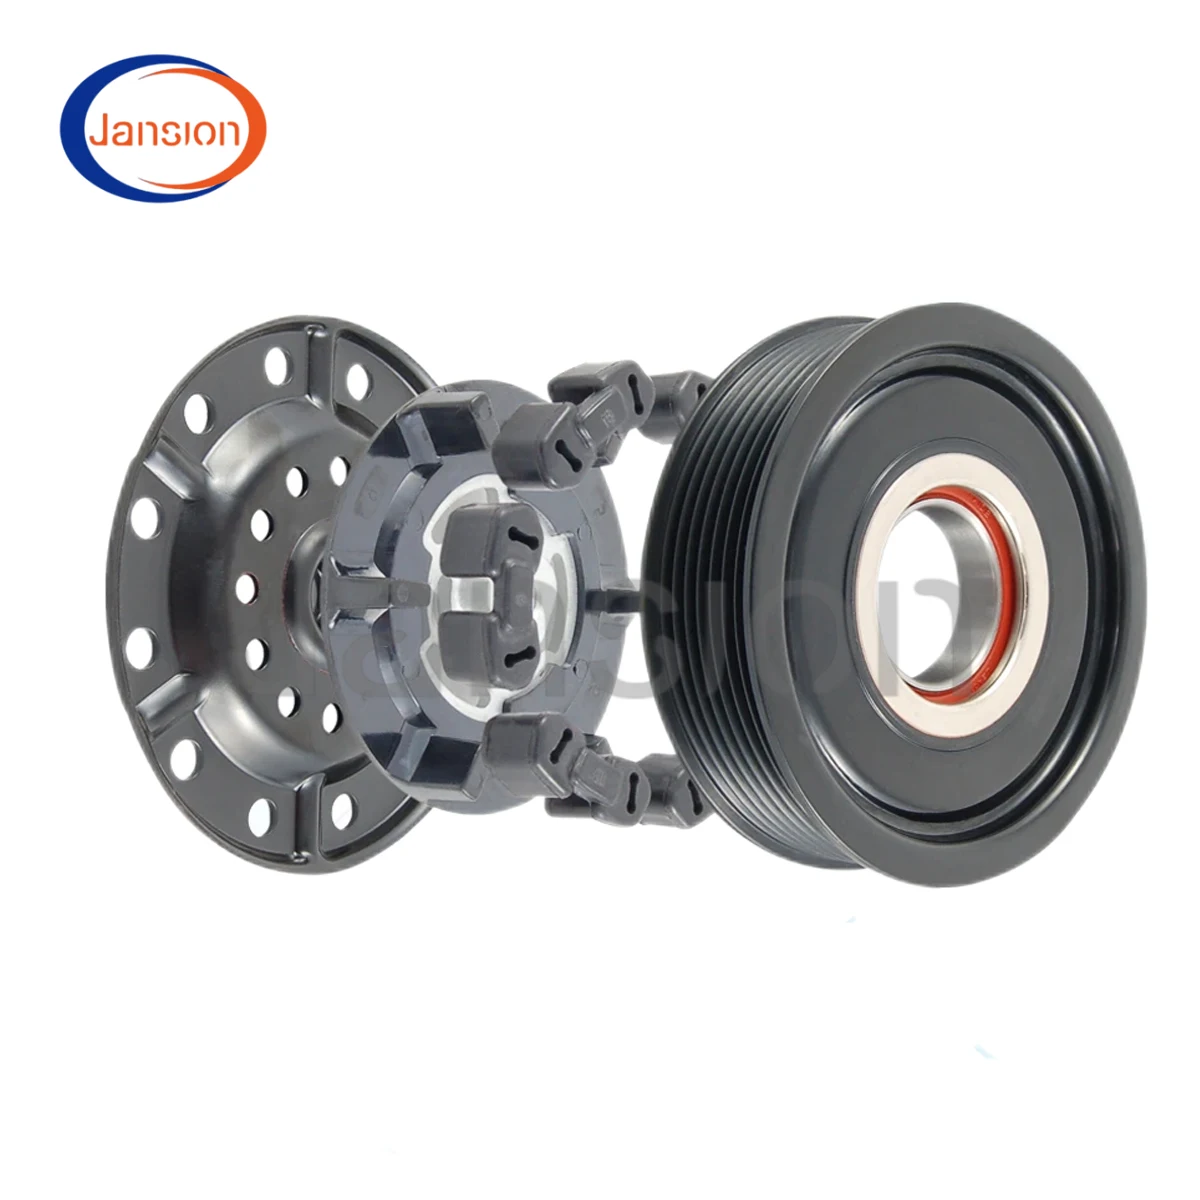 

A/C Air Conditioning Compressor Clutch Pulley 5SE12C For TOYOTA RAV4 2.0 III 2006 NISSAN NV400 VAN RENAULT ESPACE IV 8831042260